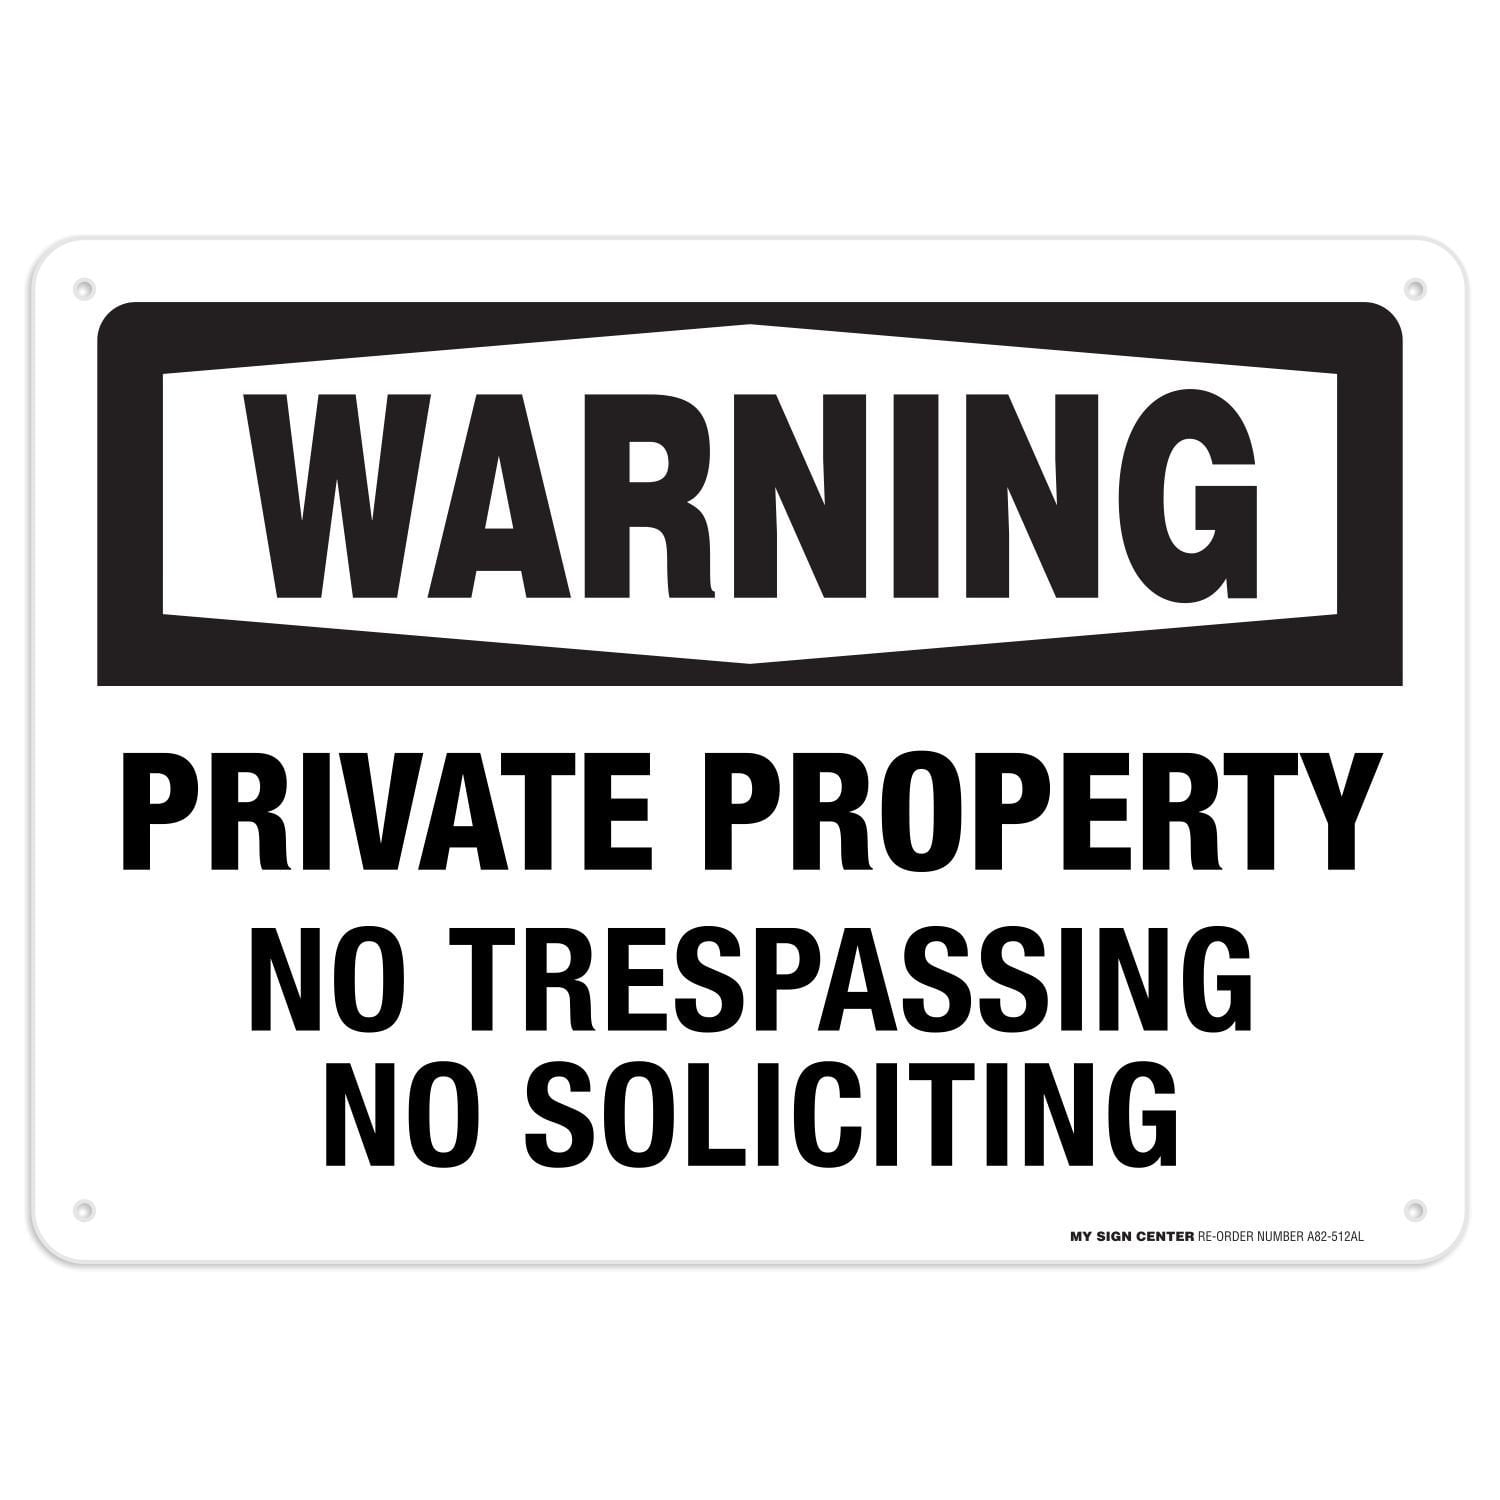 Private Property No Trespassing on an 8x12 Aluminum Sign Made in USA UV Protectd 